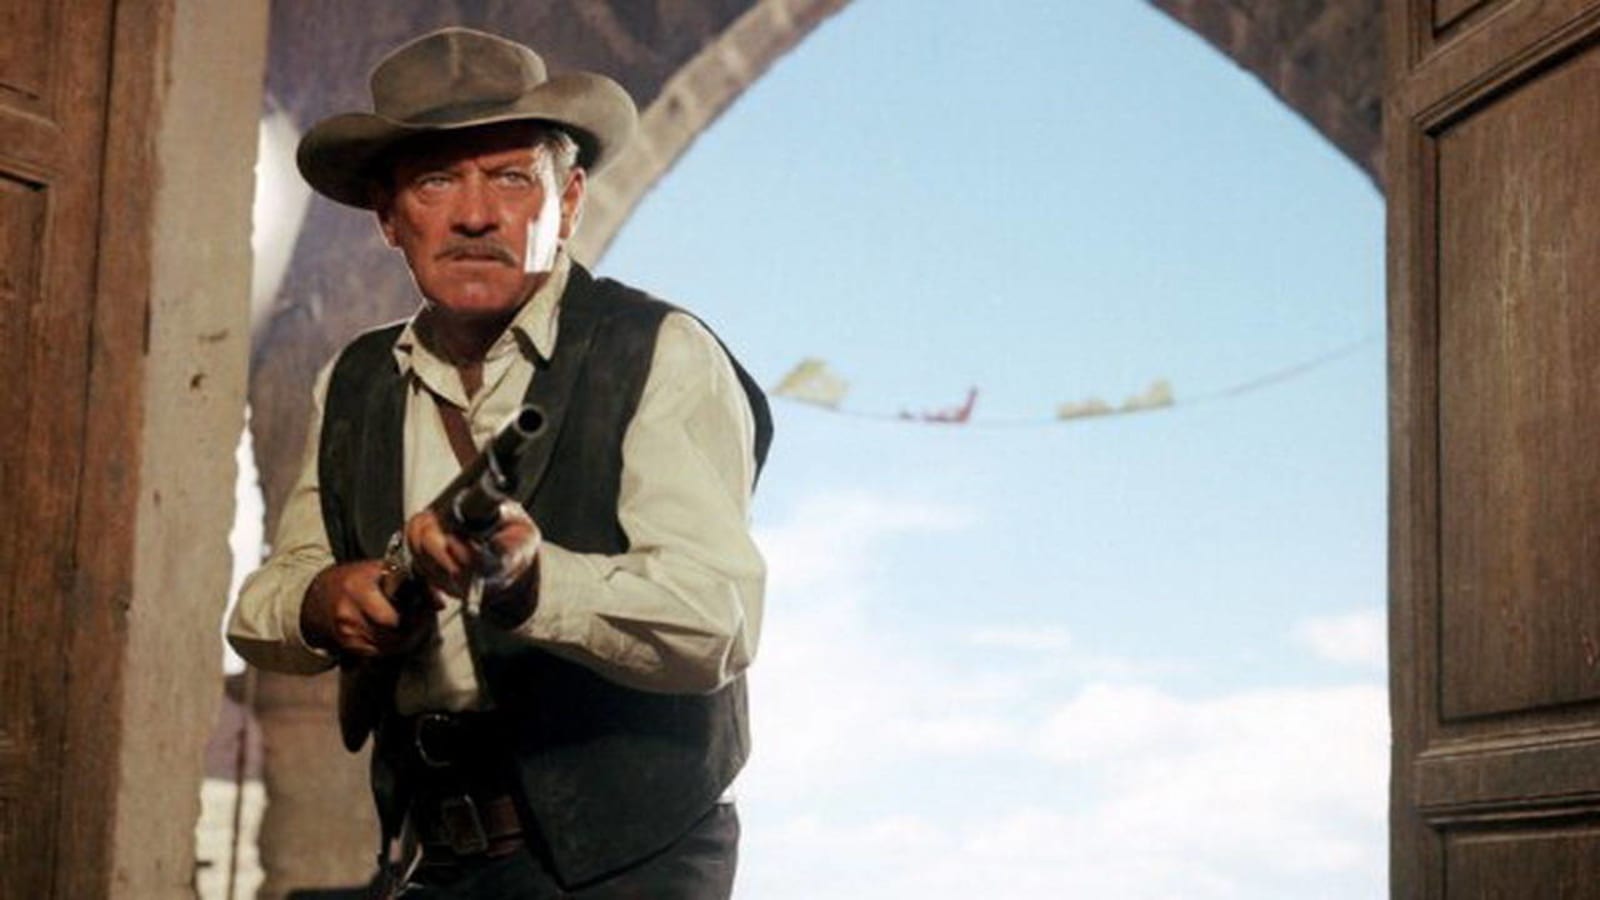 "The Wild Bunch" is still an ambiguously bloody masterpiece 50 years later